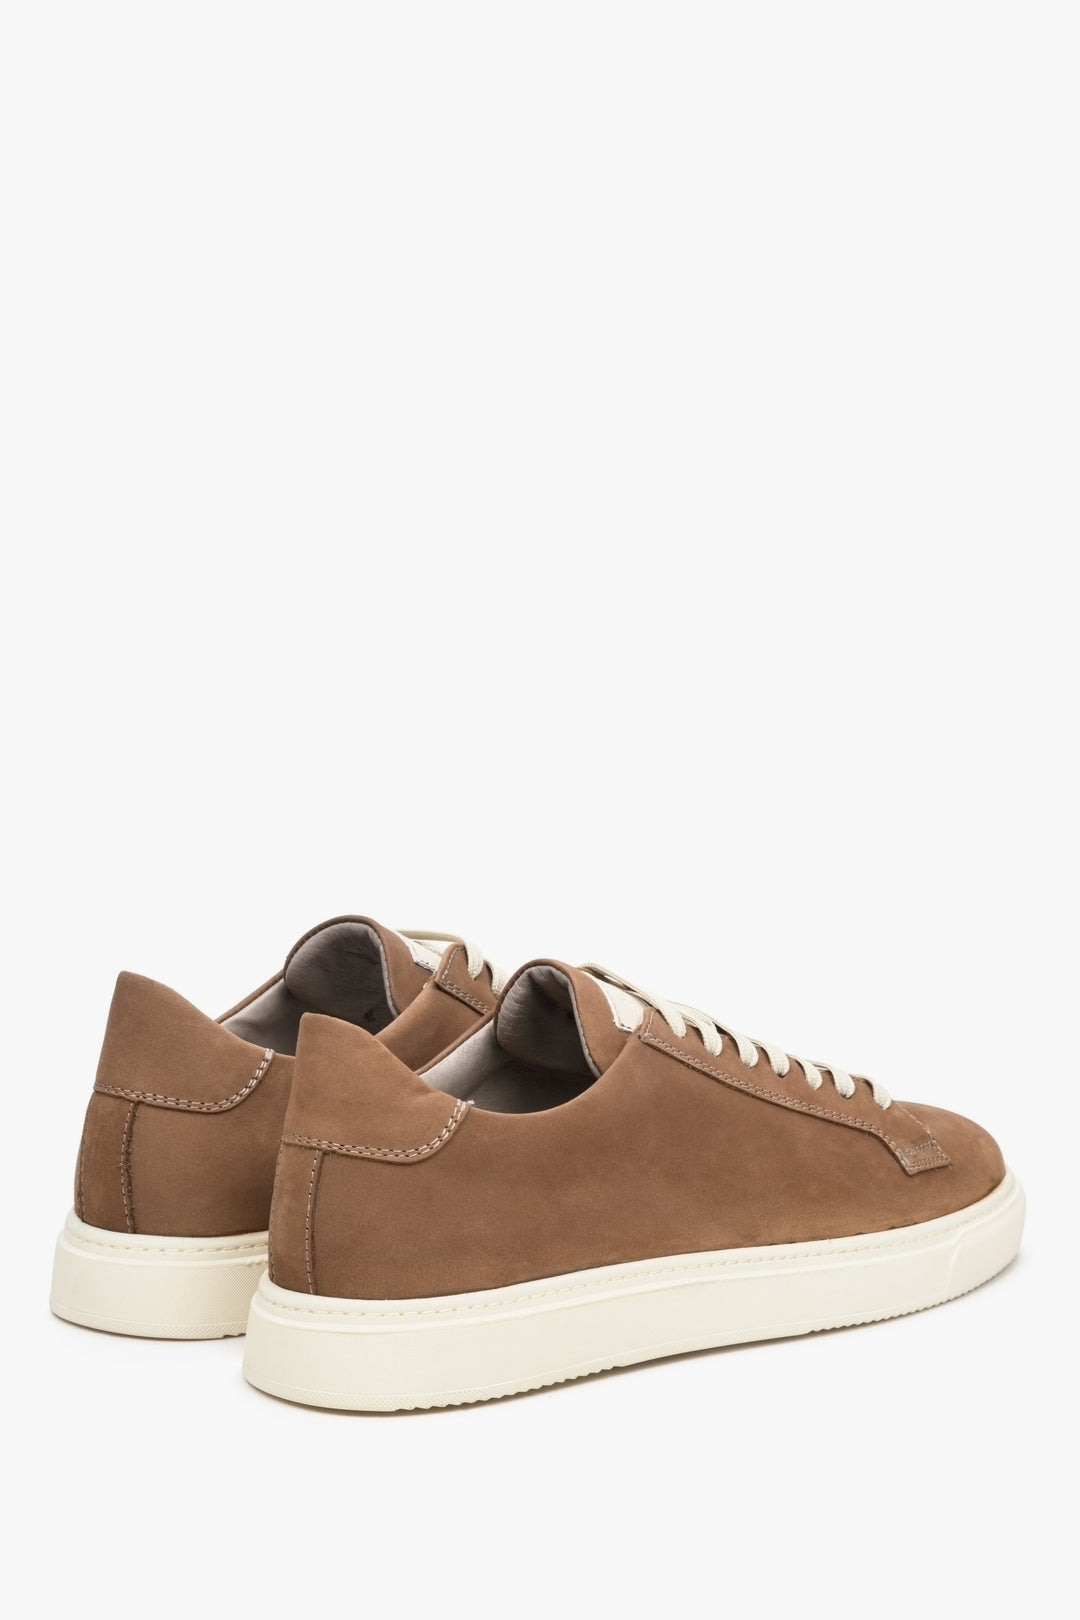 Brown nubuck men's sneakers for spring Estro - presentation of the sole and side seam.